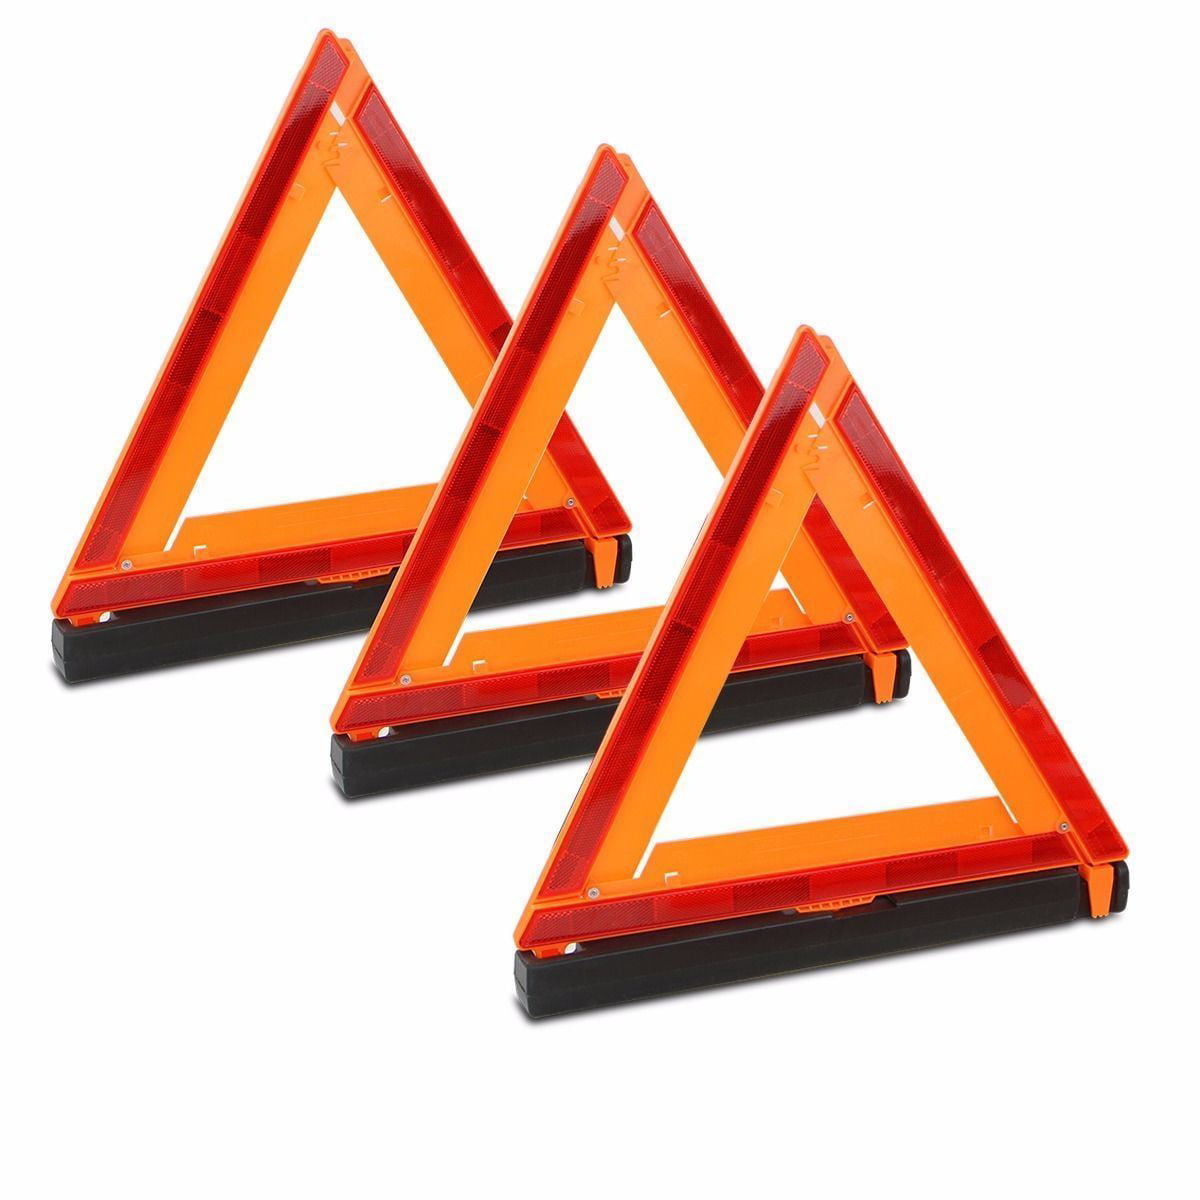 Hieefi 1PC Portable Warning Reflector Slow Moving Vehicle Sign with Reflective Tape Safety Triangle Warning Sign for Truck Trailer Car Accessories